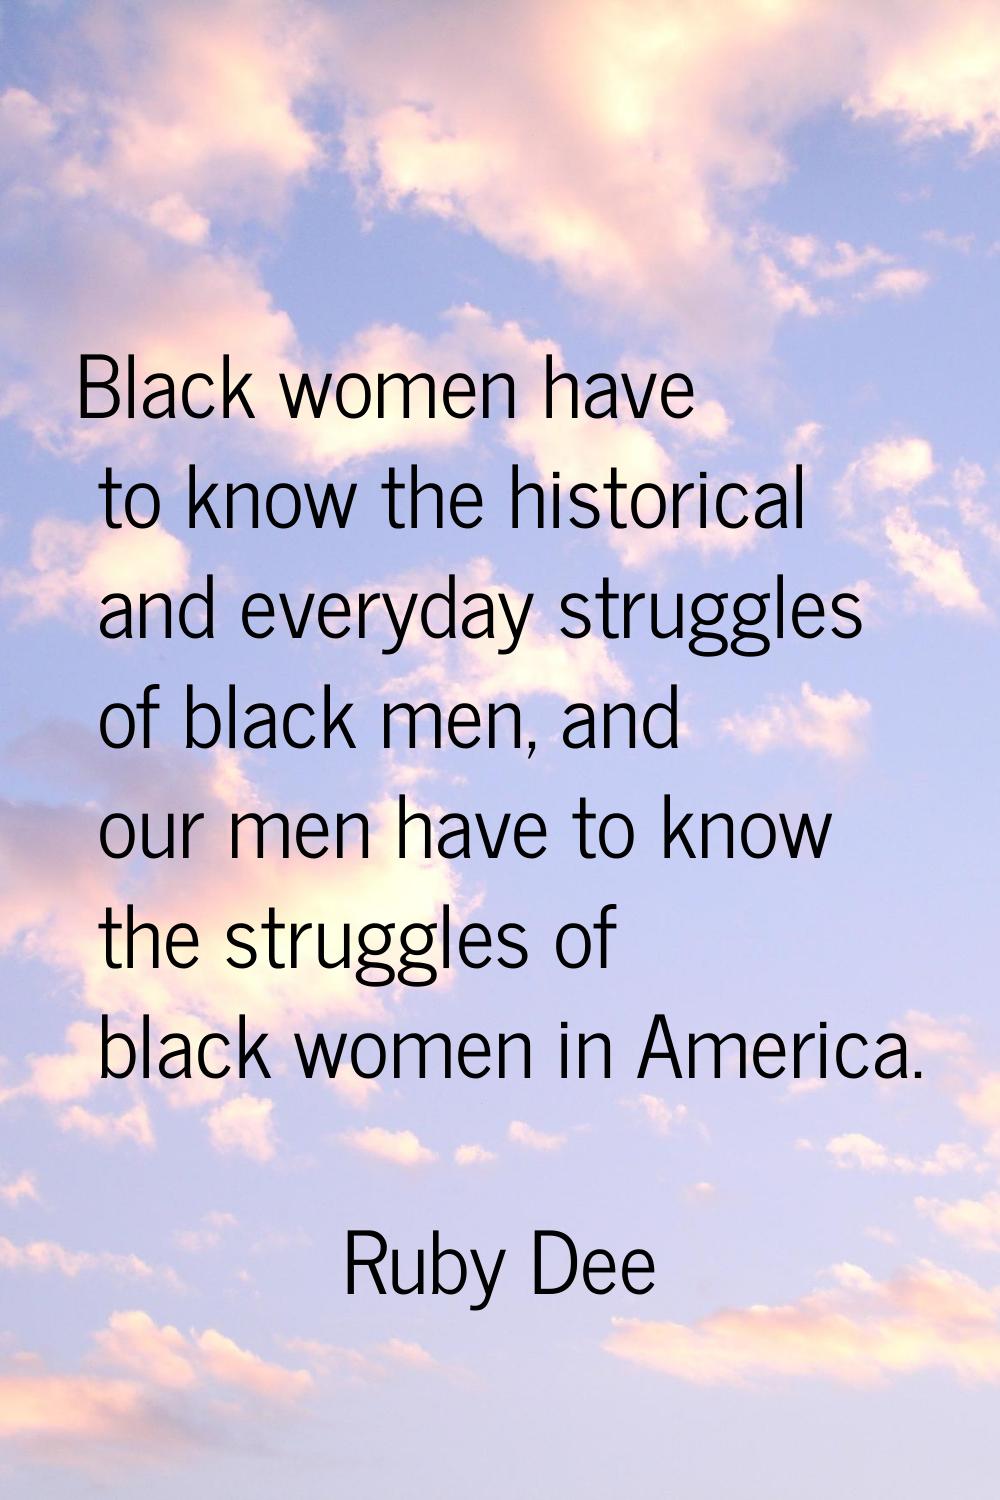 Black women have to know the historical and everyday struggles of black men, and our men have to kn